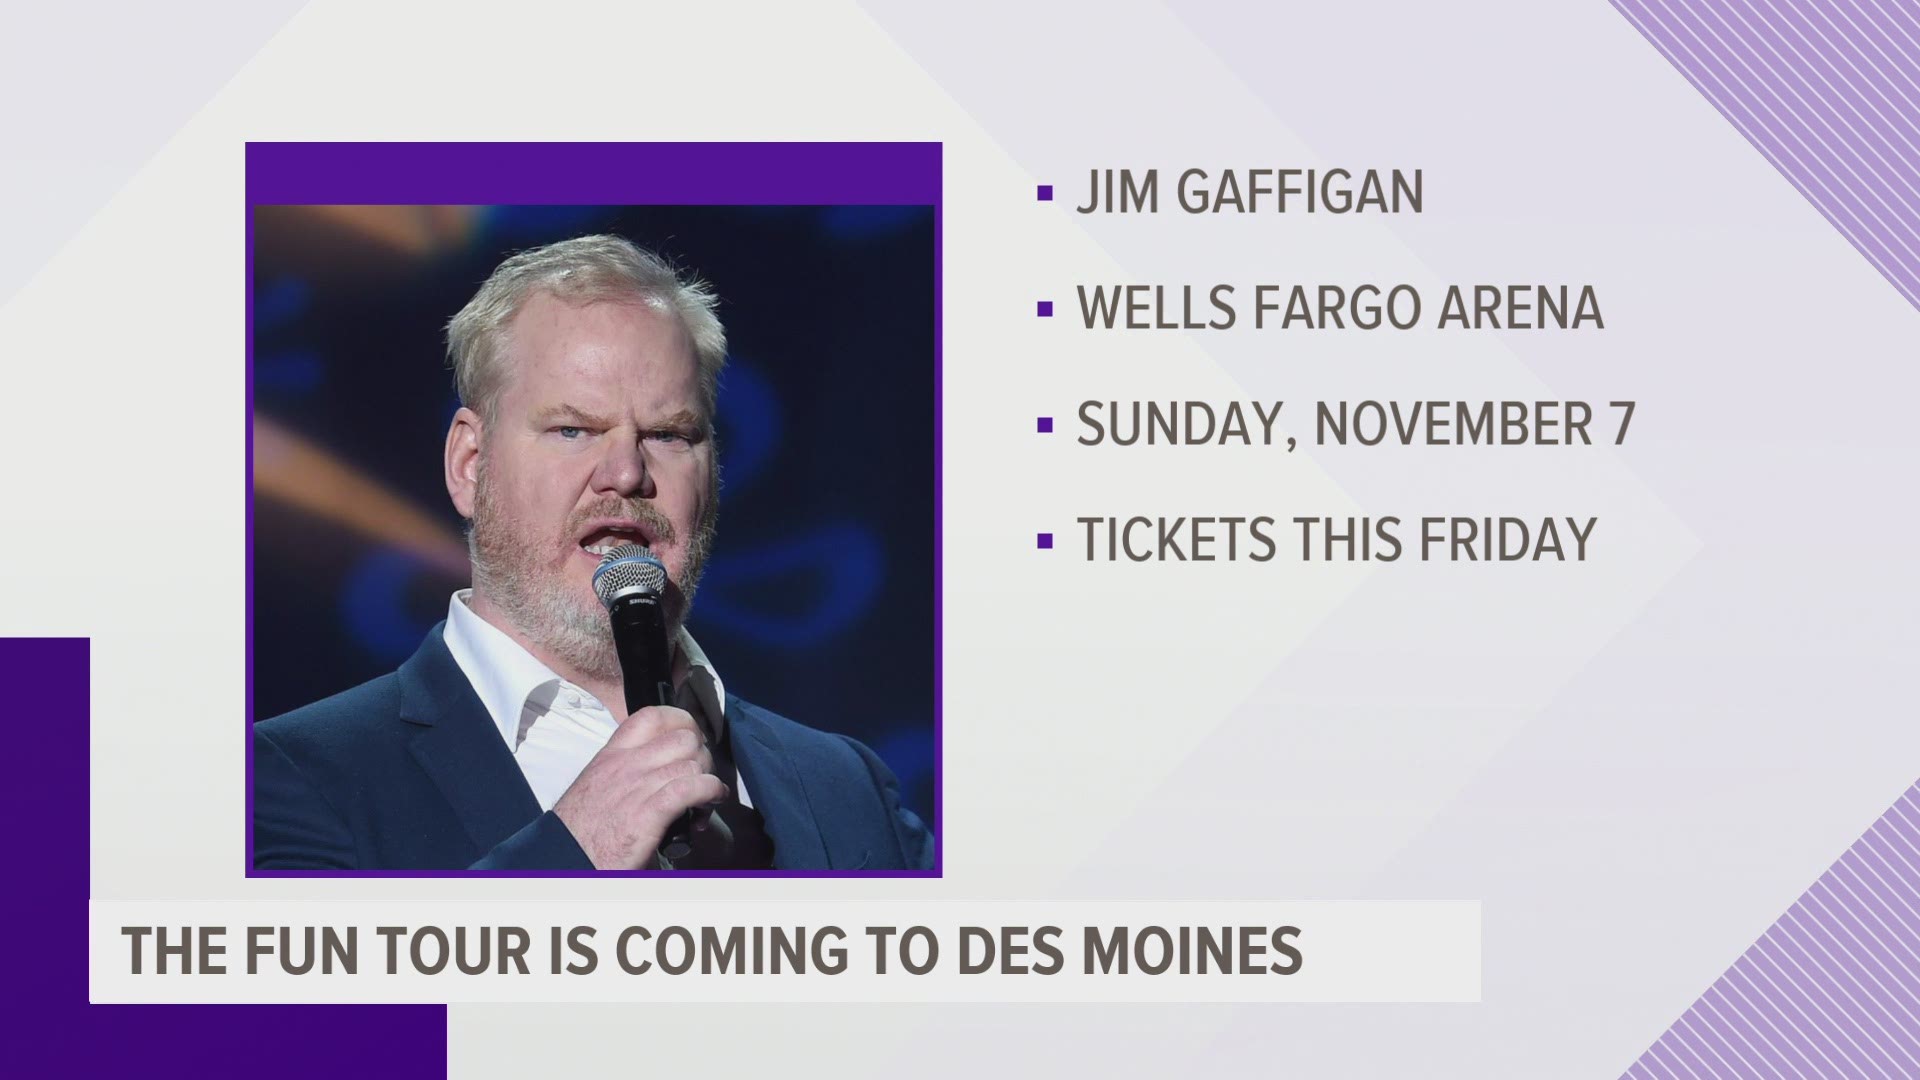 "Everyone's favorite dad" will be in Des Moines on November 7. Tickets go on sale on May 14.